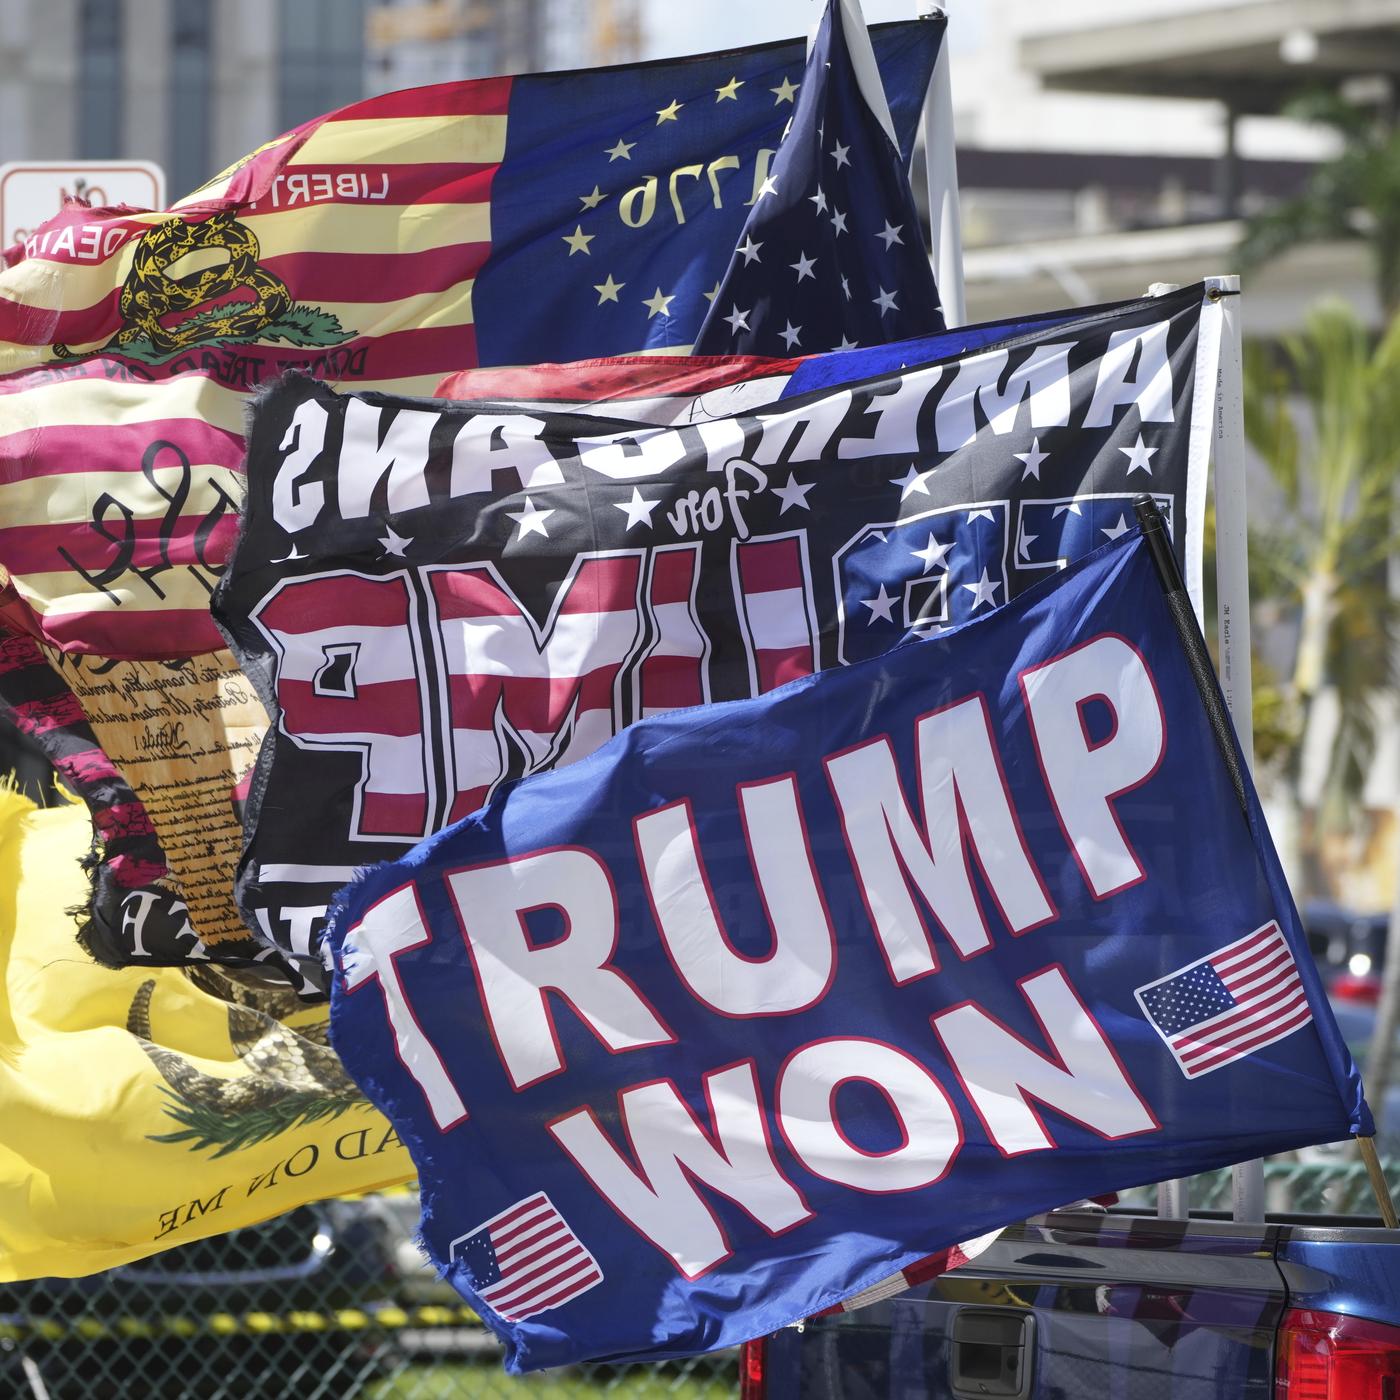 Media Coverage of the Trump Movement is Missing Vital Context